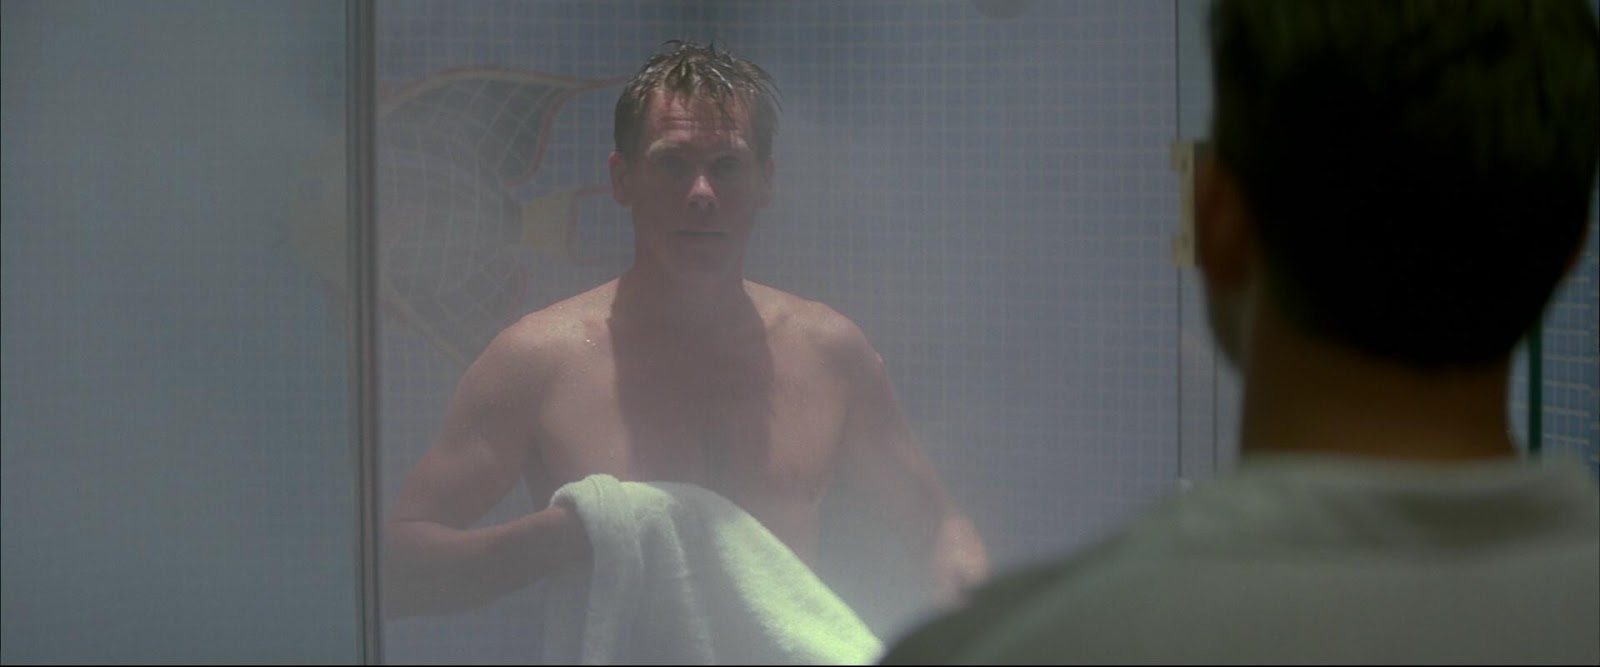 Kevin Bacon frontal in Wild Things-new HD caps & Clip 18/01/18.